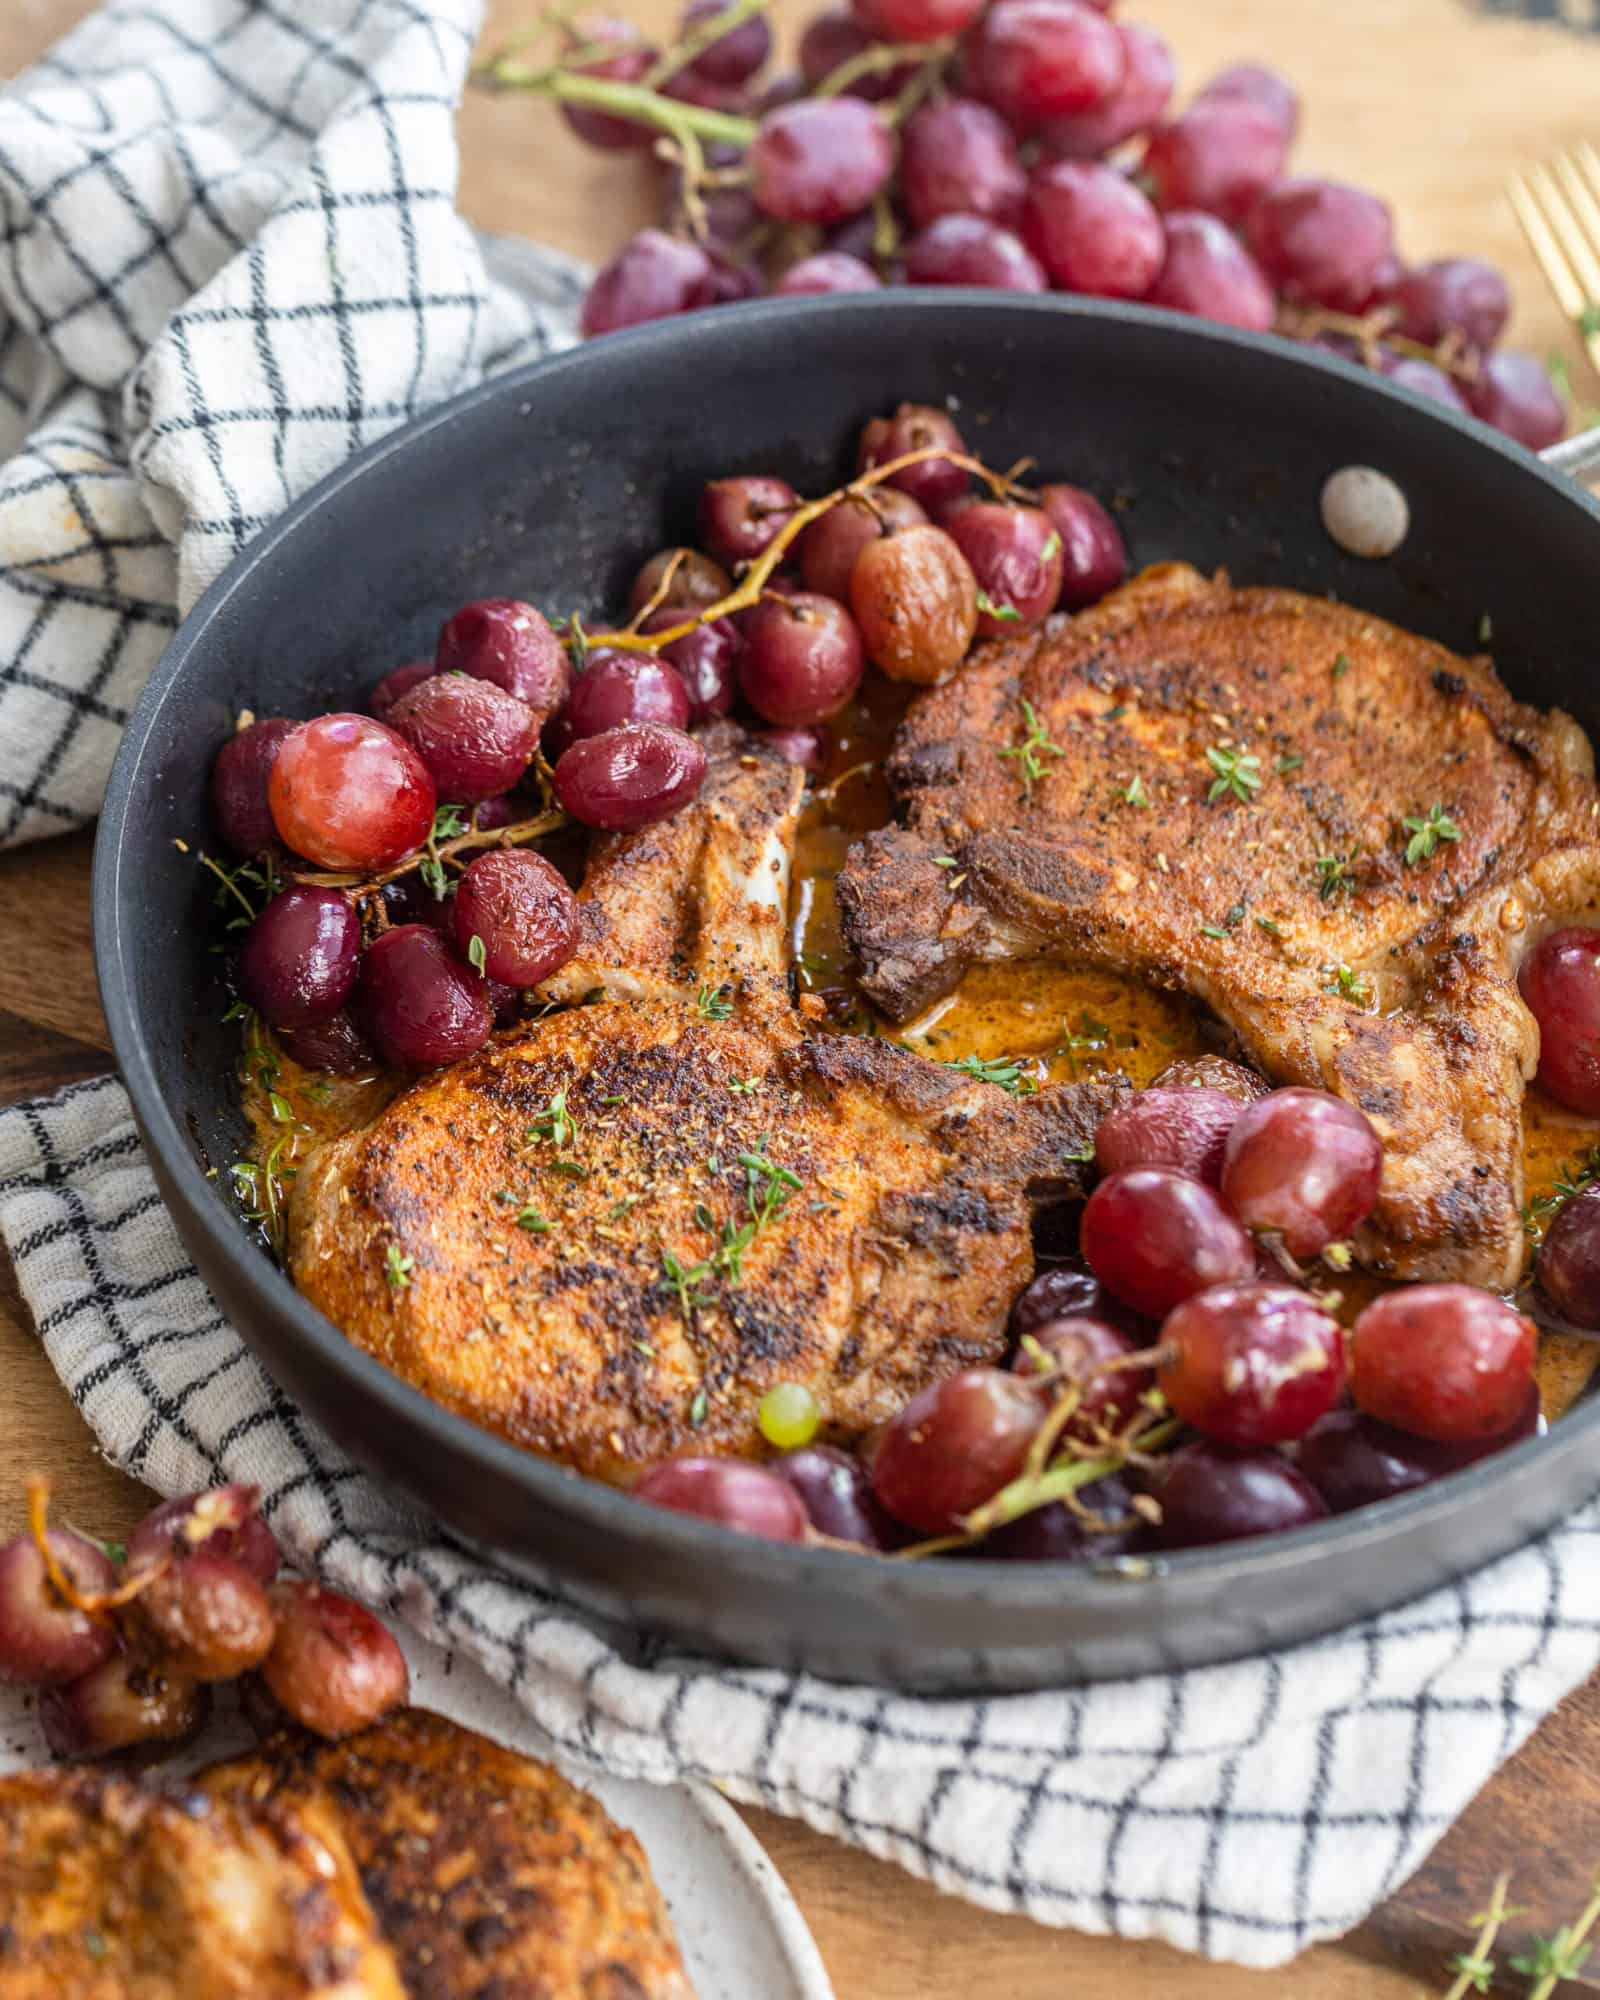 Pork chops in a pan with roasted grapes